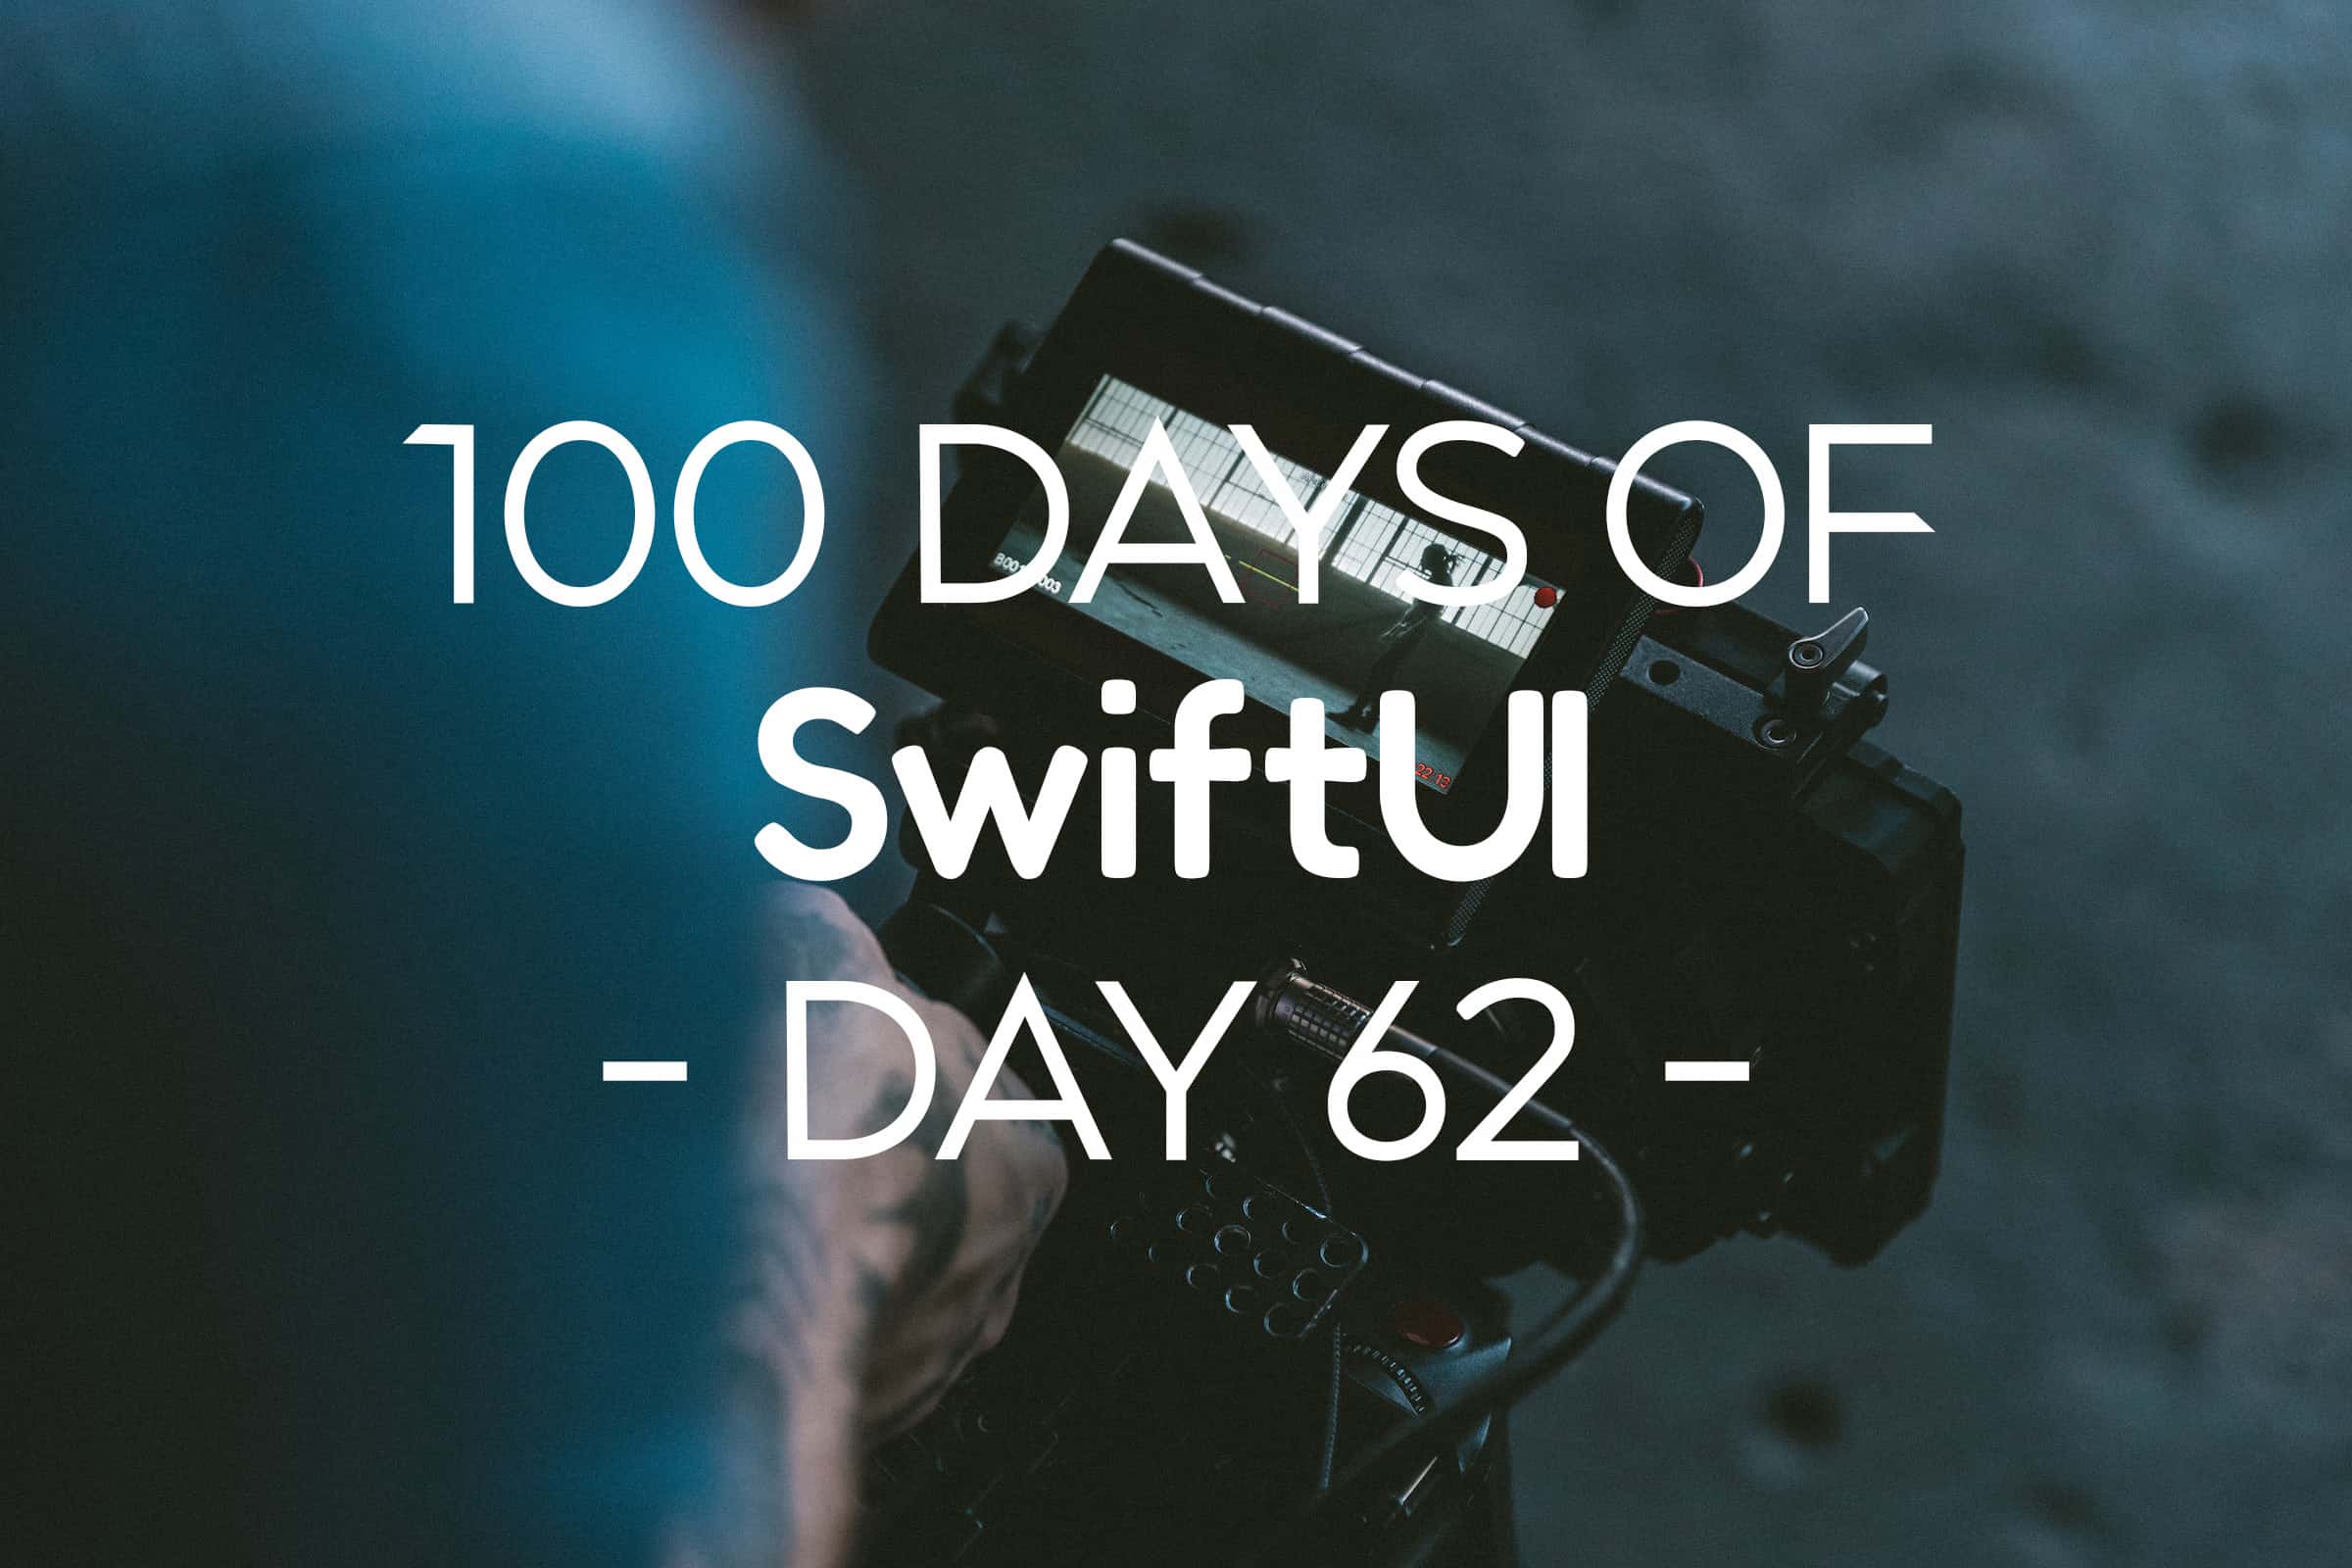 100 Days of SwiftUI Day 62